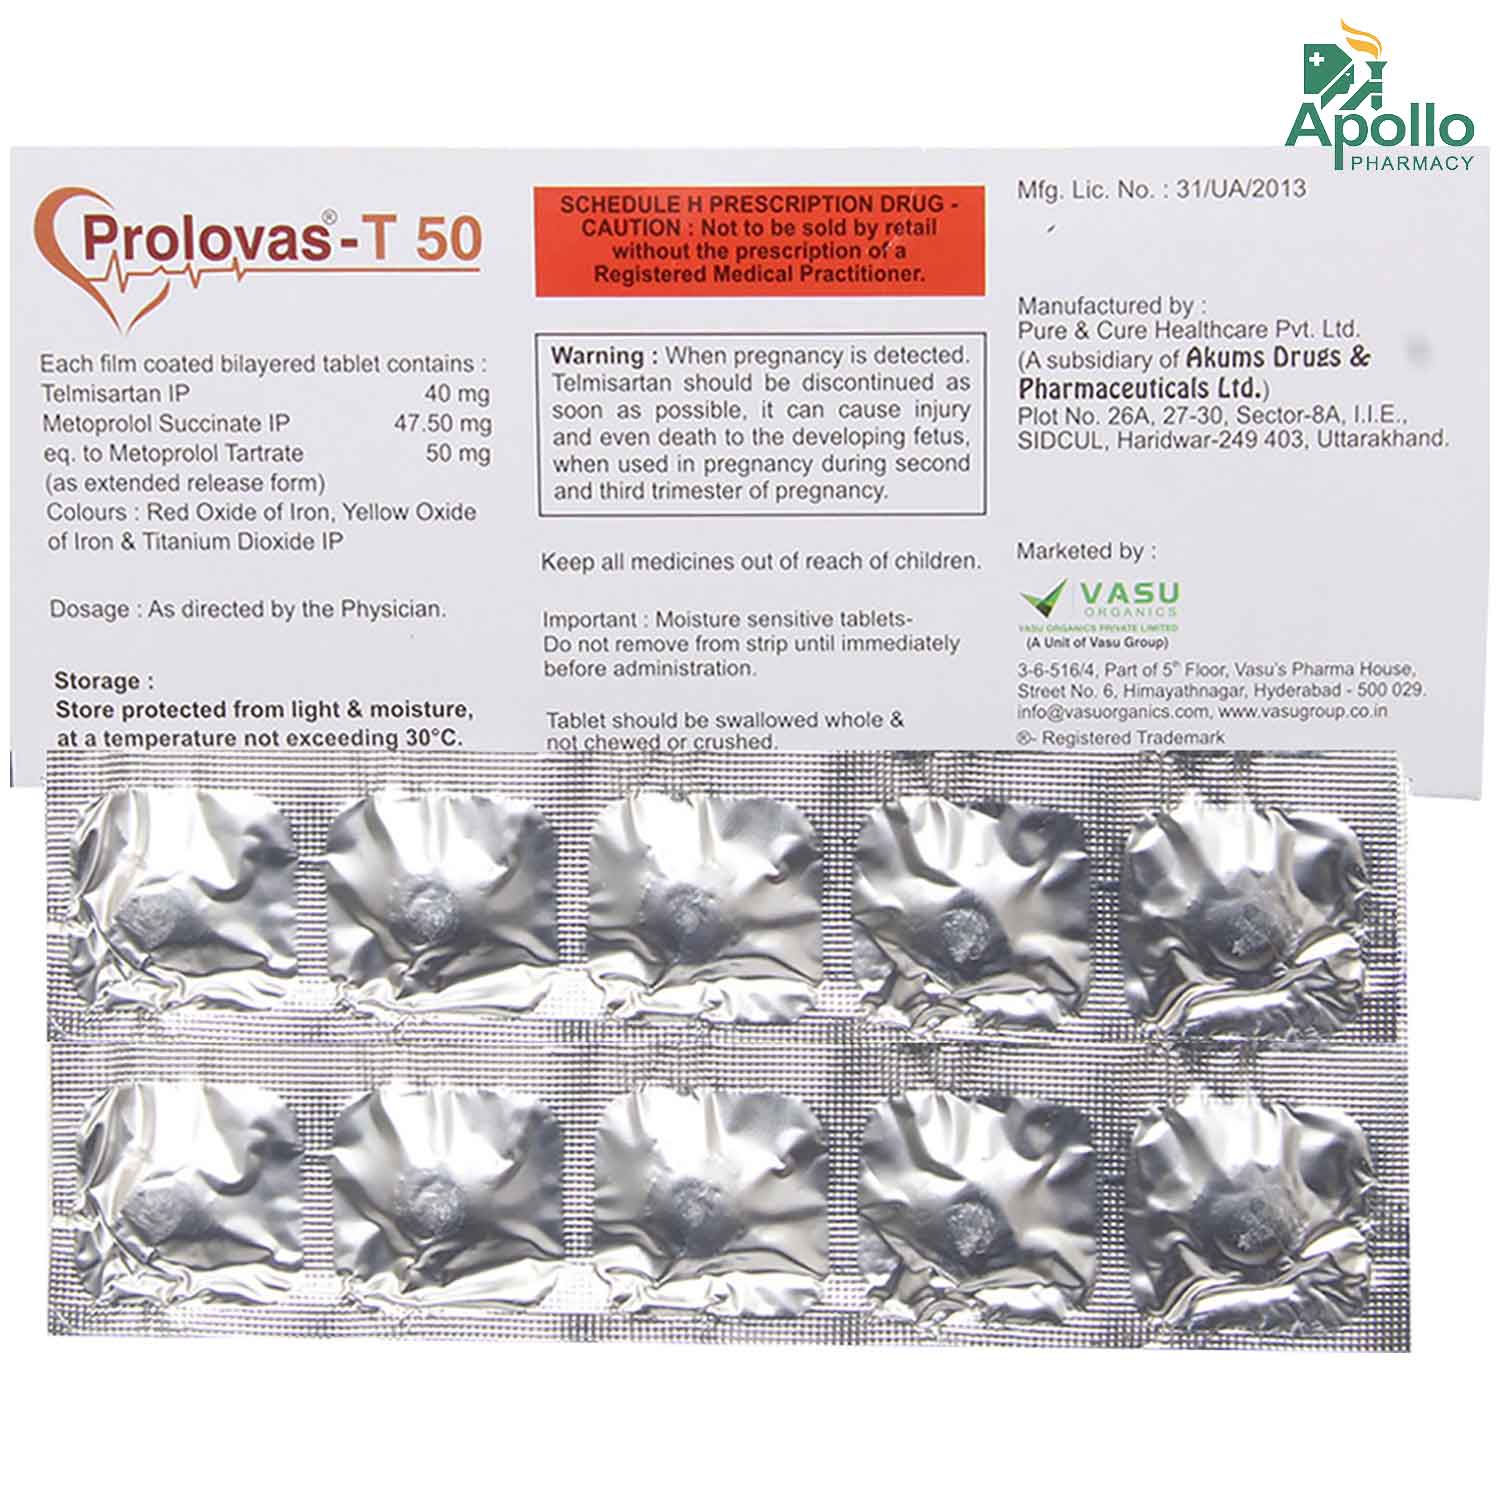 Prolovas-T 50 Tablet 10's, Pack of 10 TABLETS